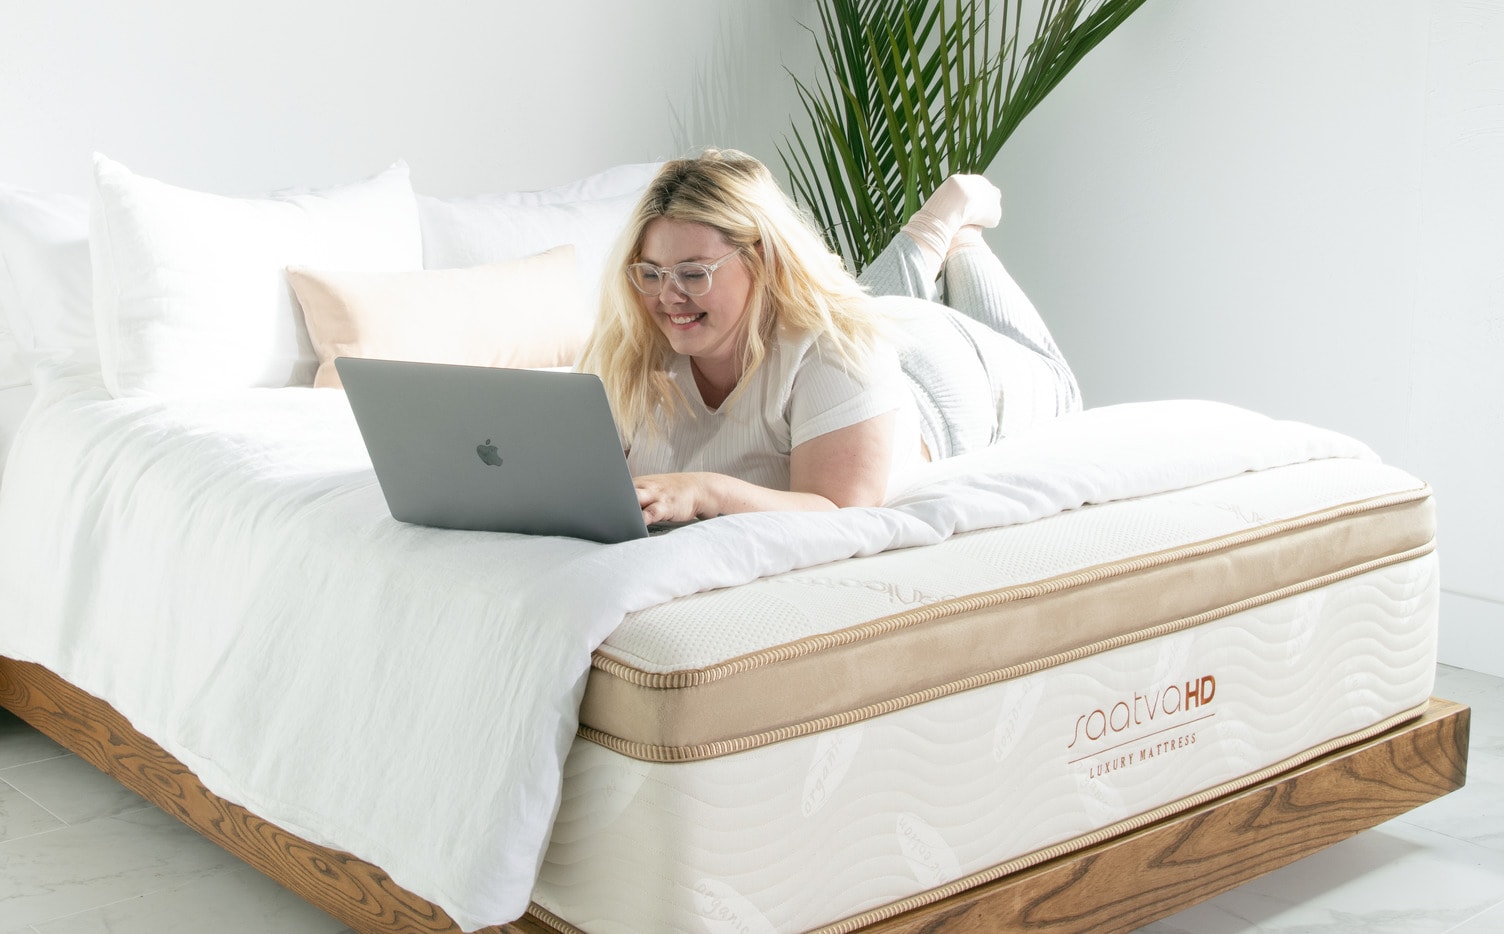 best mattress for big people